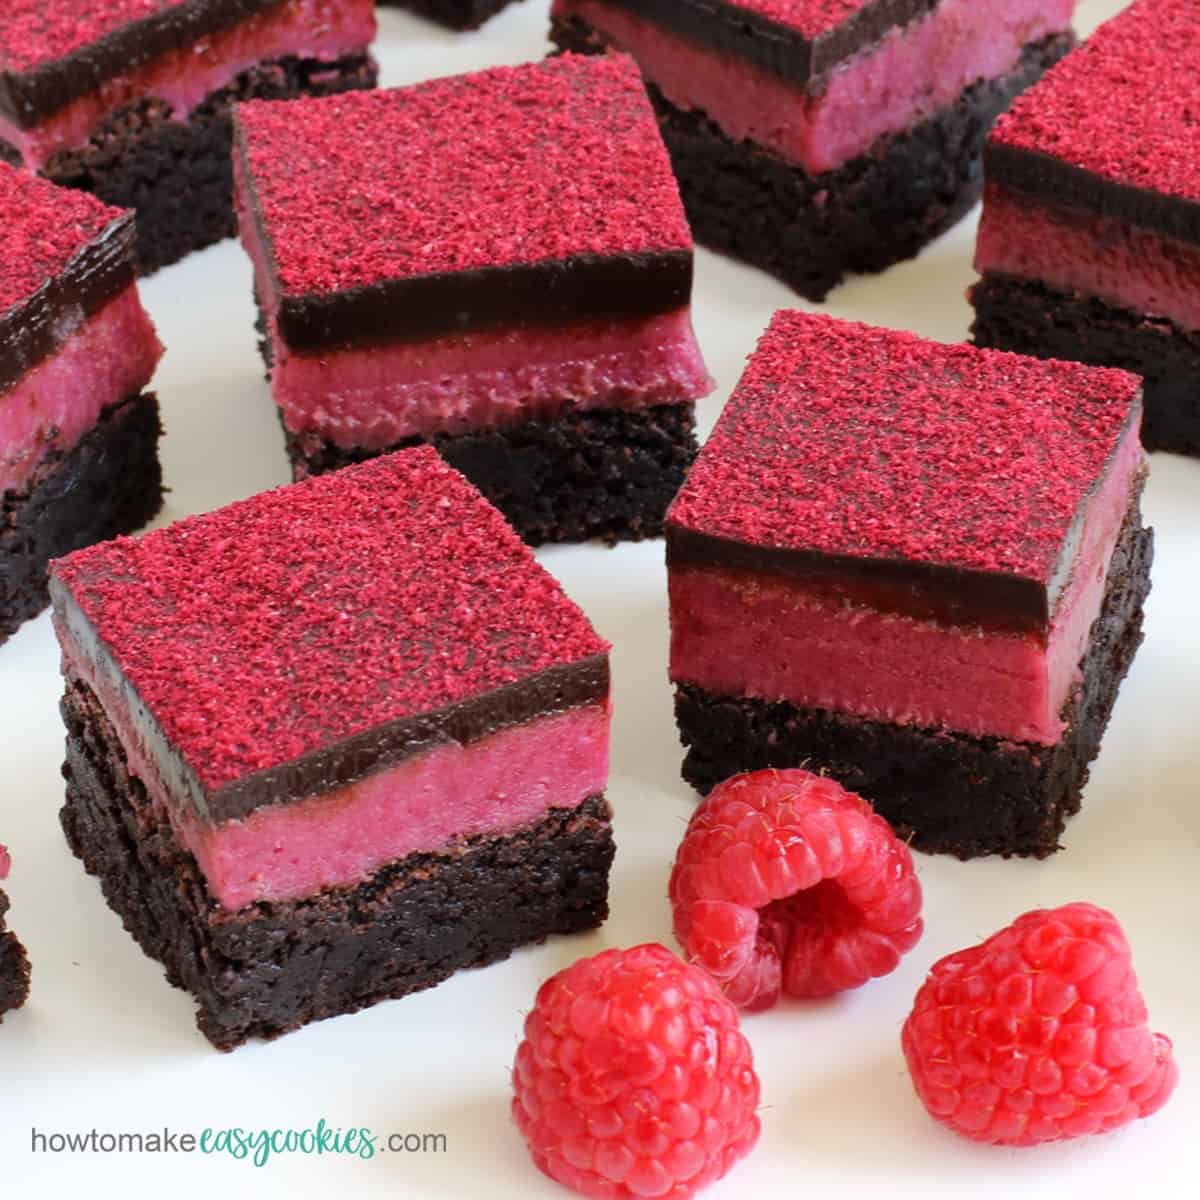 rasbperry chocolate cookie bars topped with freeze-dried raspberry powder